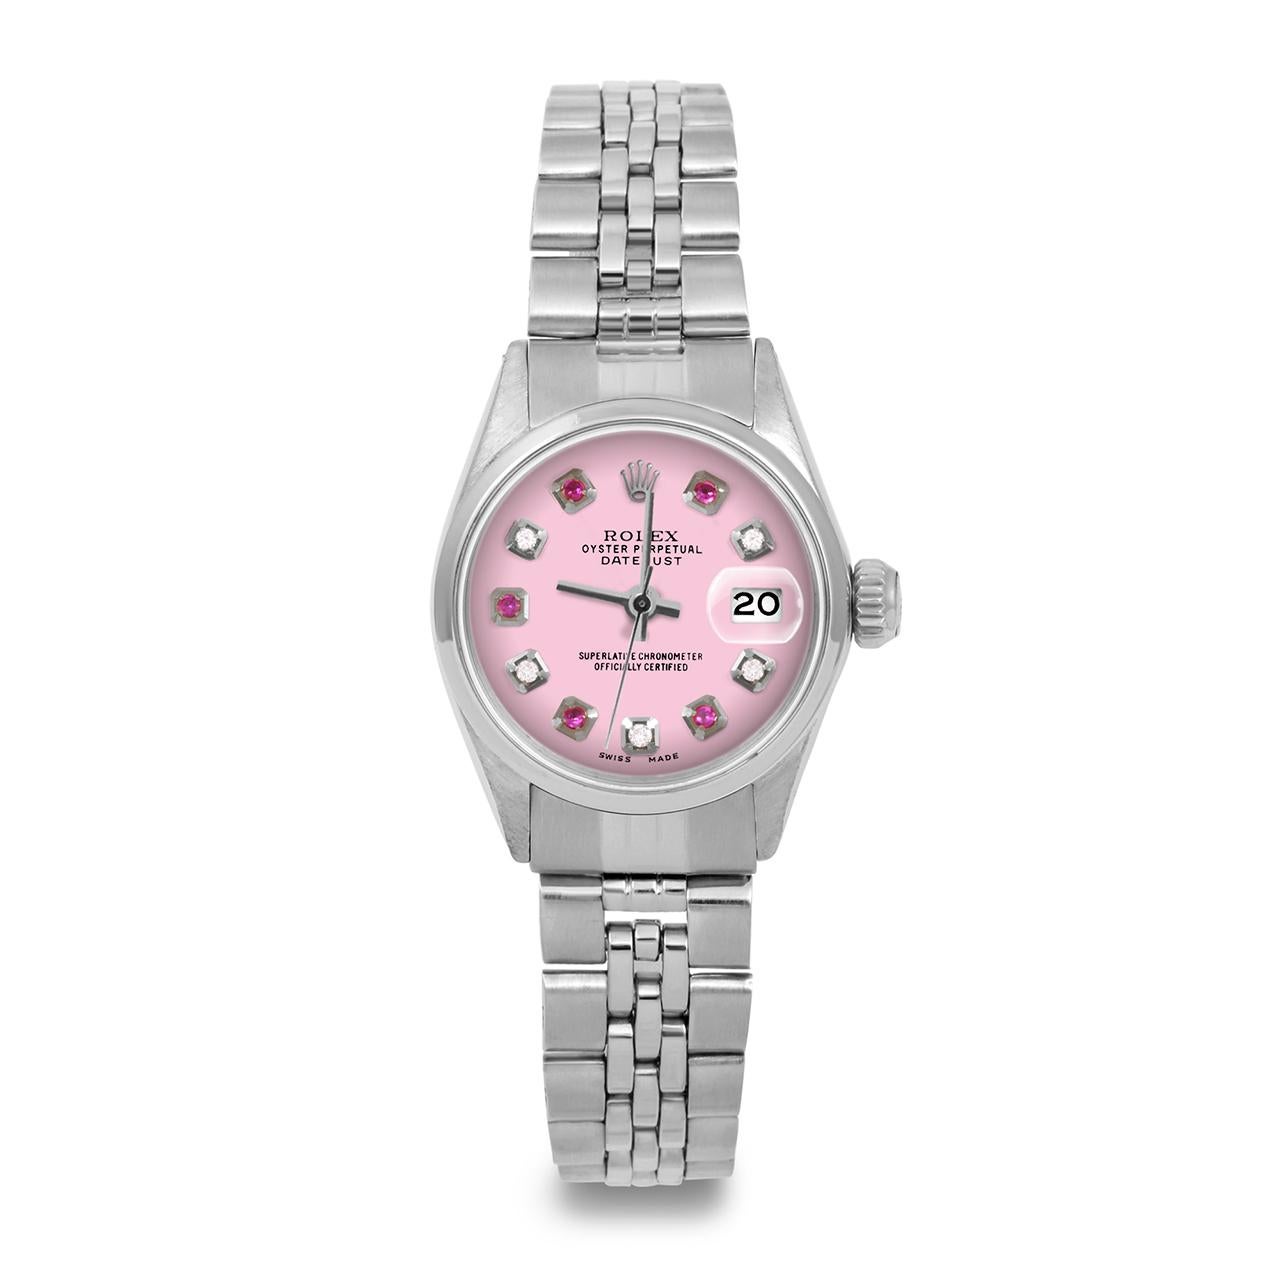 Brand : Rolex
Model : Datejust (Non-Quickset Model)
Gender : Ladies
Metals : Stainless Steel
Case Size : 24 mm

Dial : Custom Pink Ruby Diamond Dial (This dial is not original Rolex And has been added aftermarket yet is a beautiful Custom